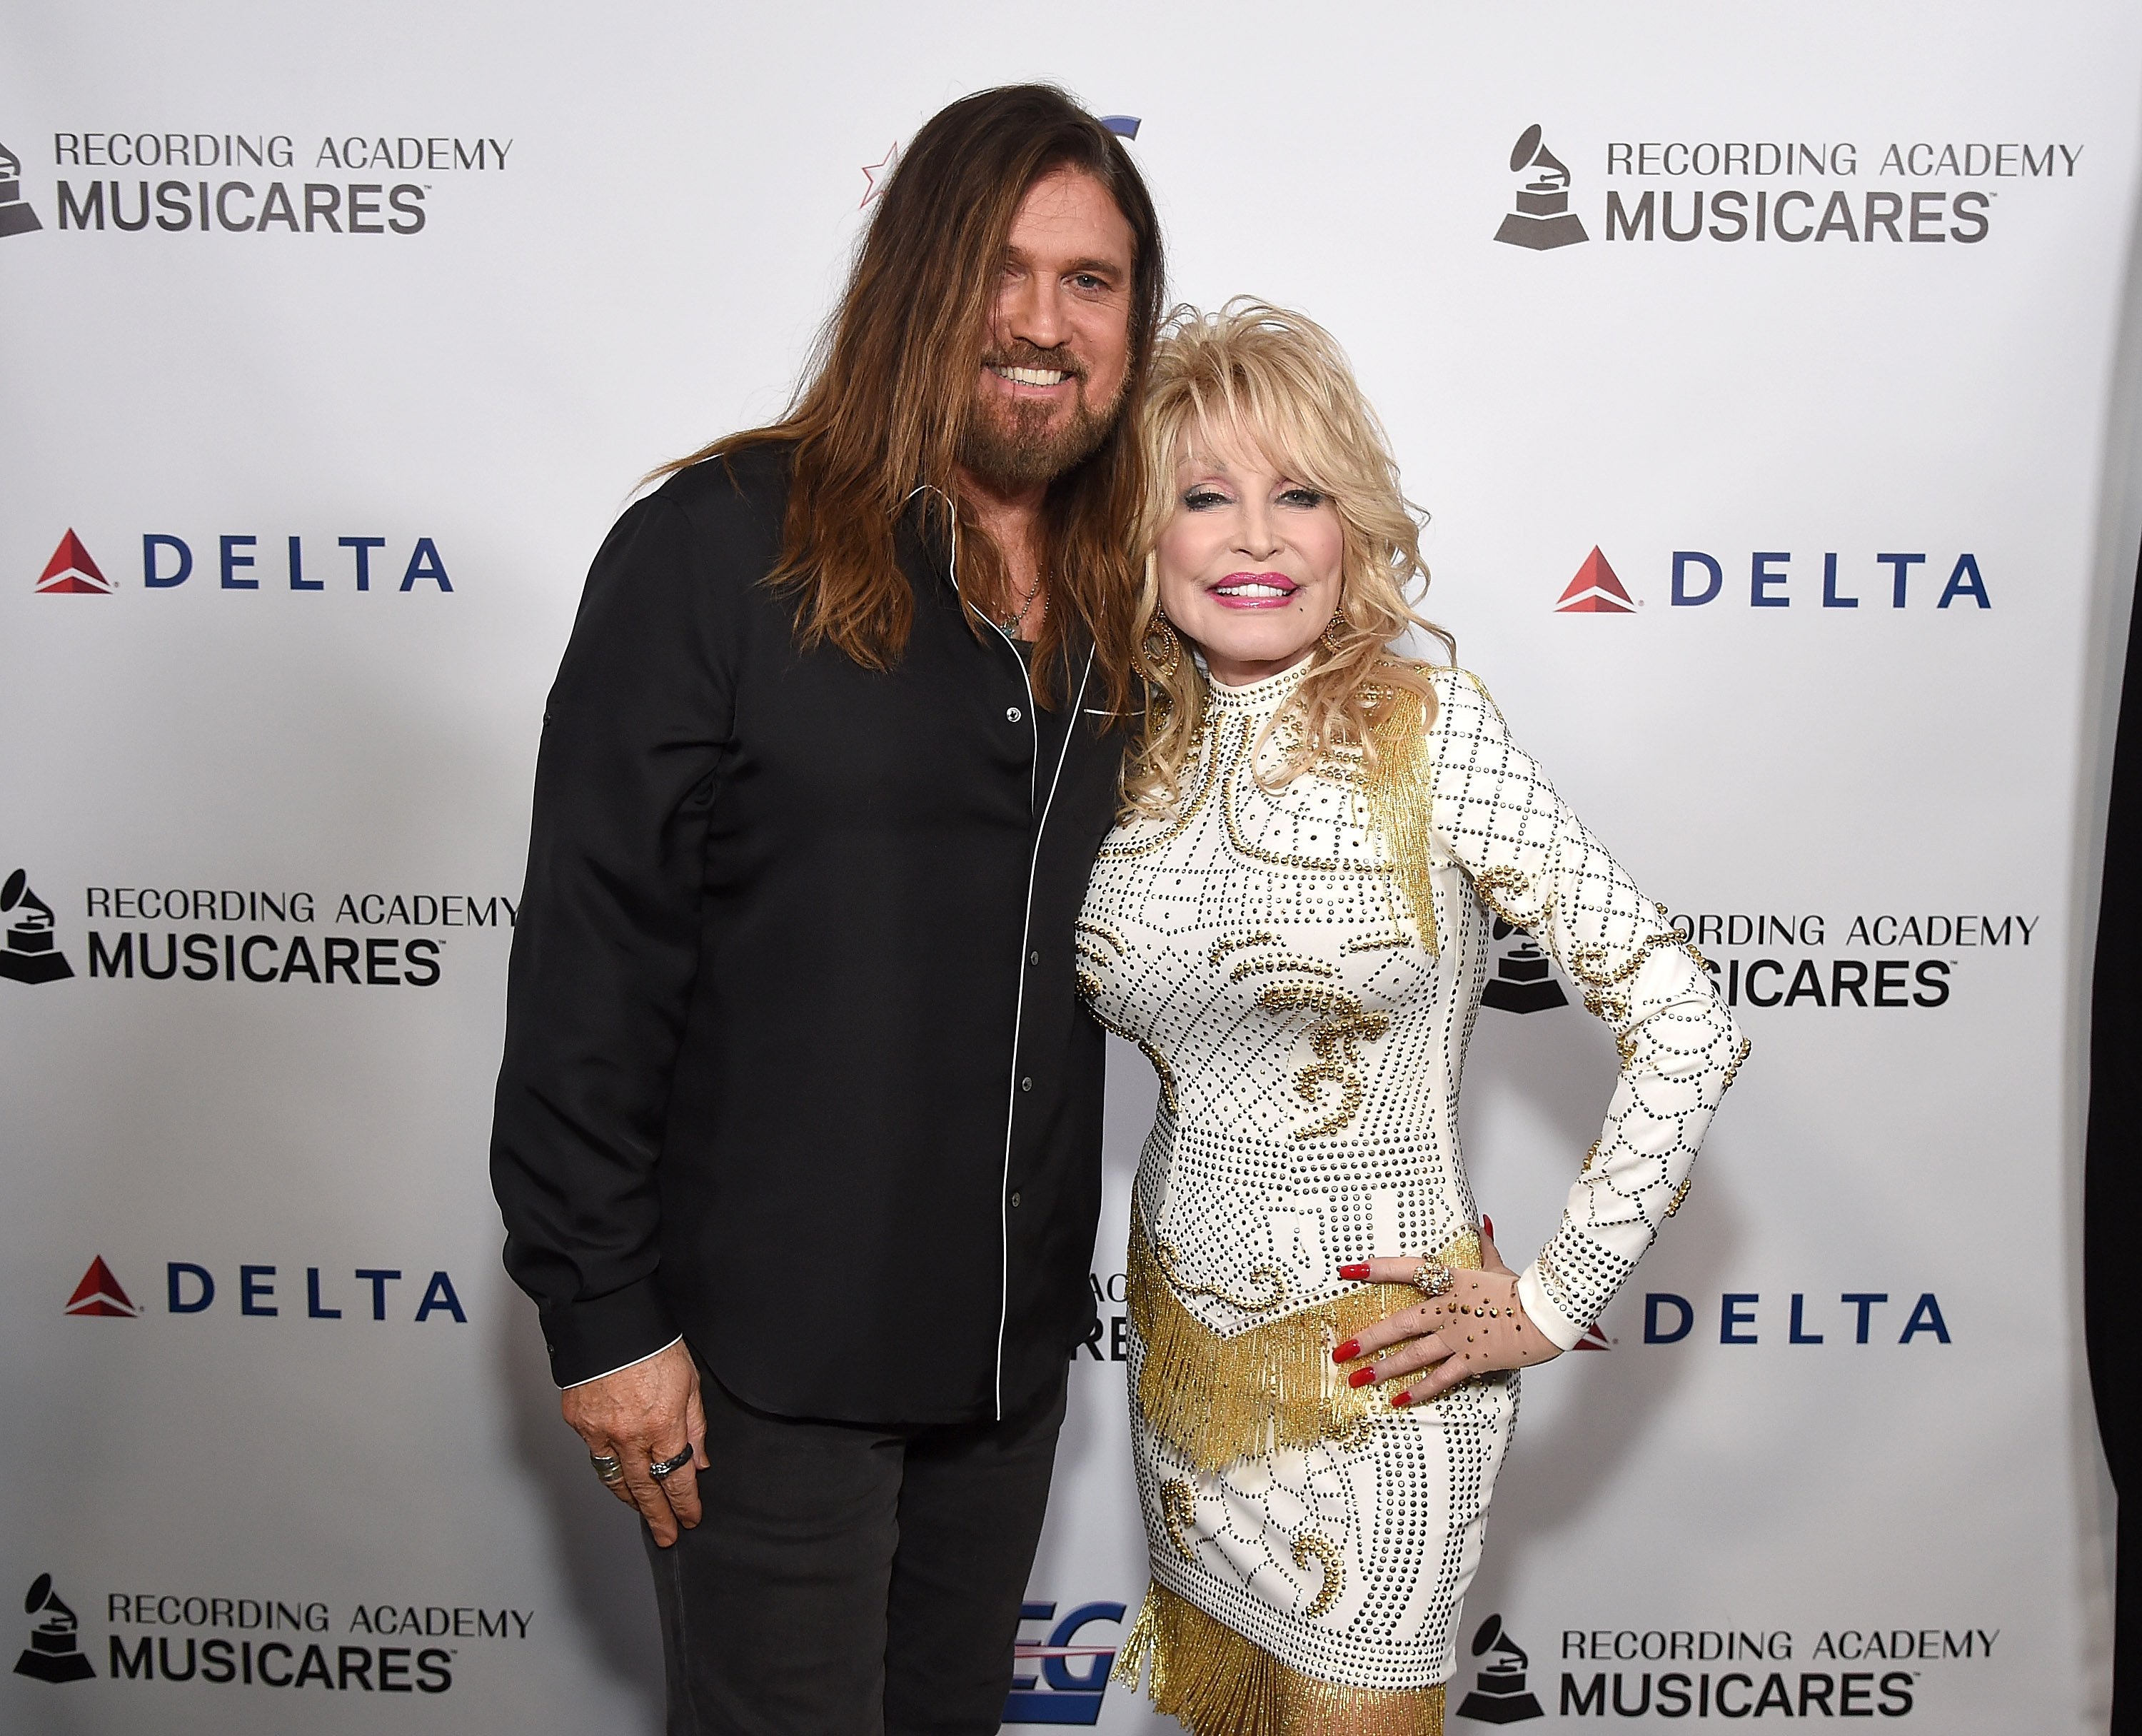 Billy Ray Cyrus wears a black jacket and Dolly Parton wears a gold and white dress. They pose standing close together.